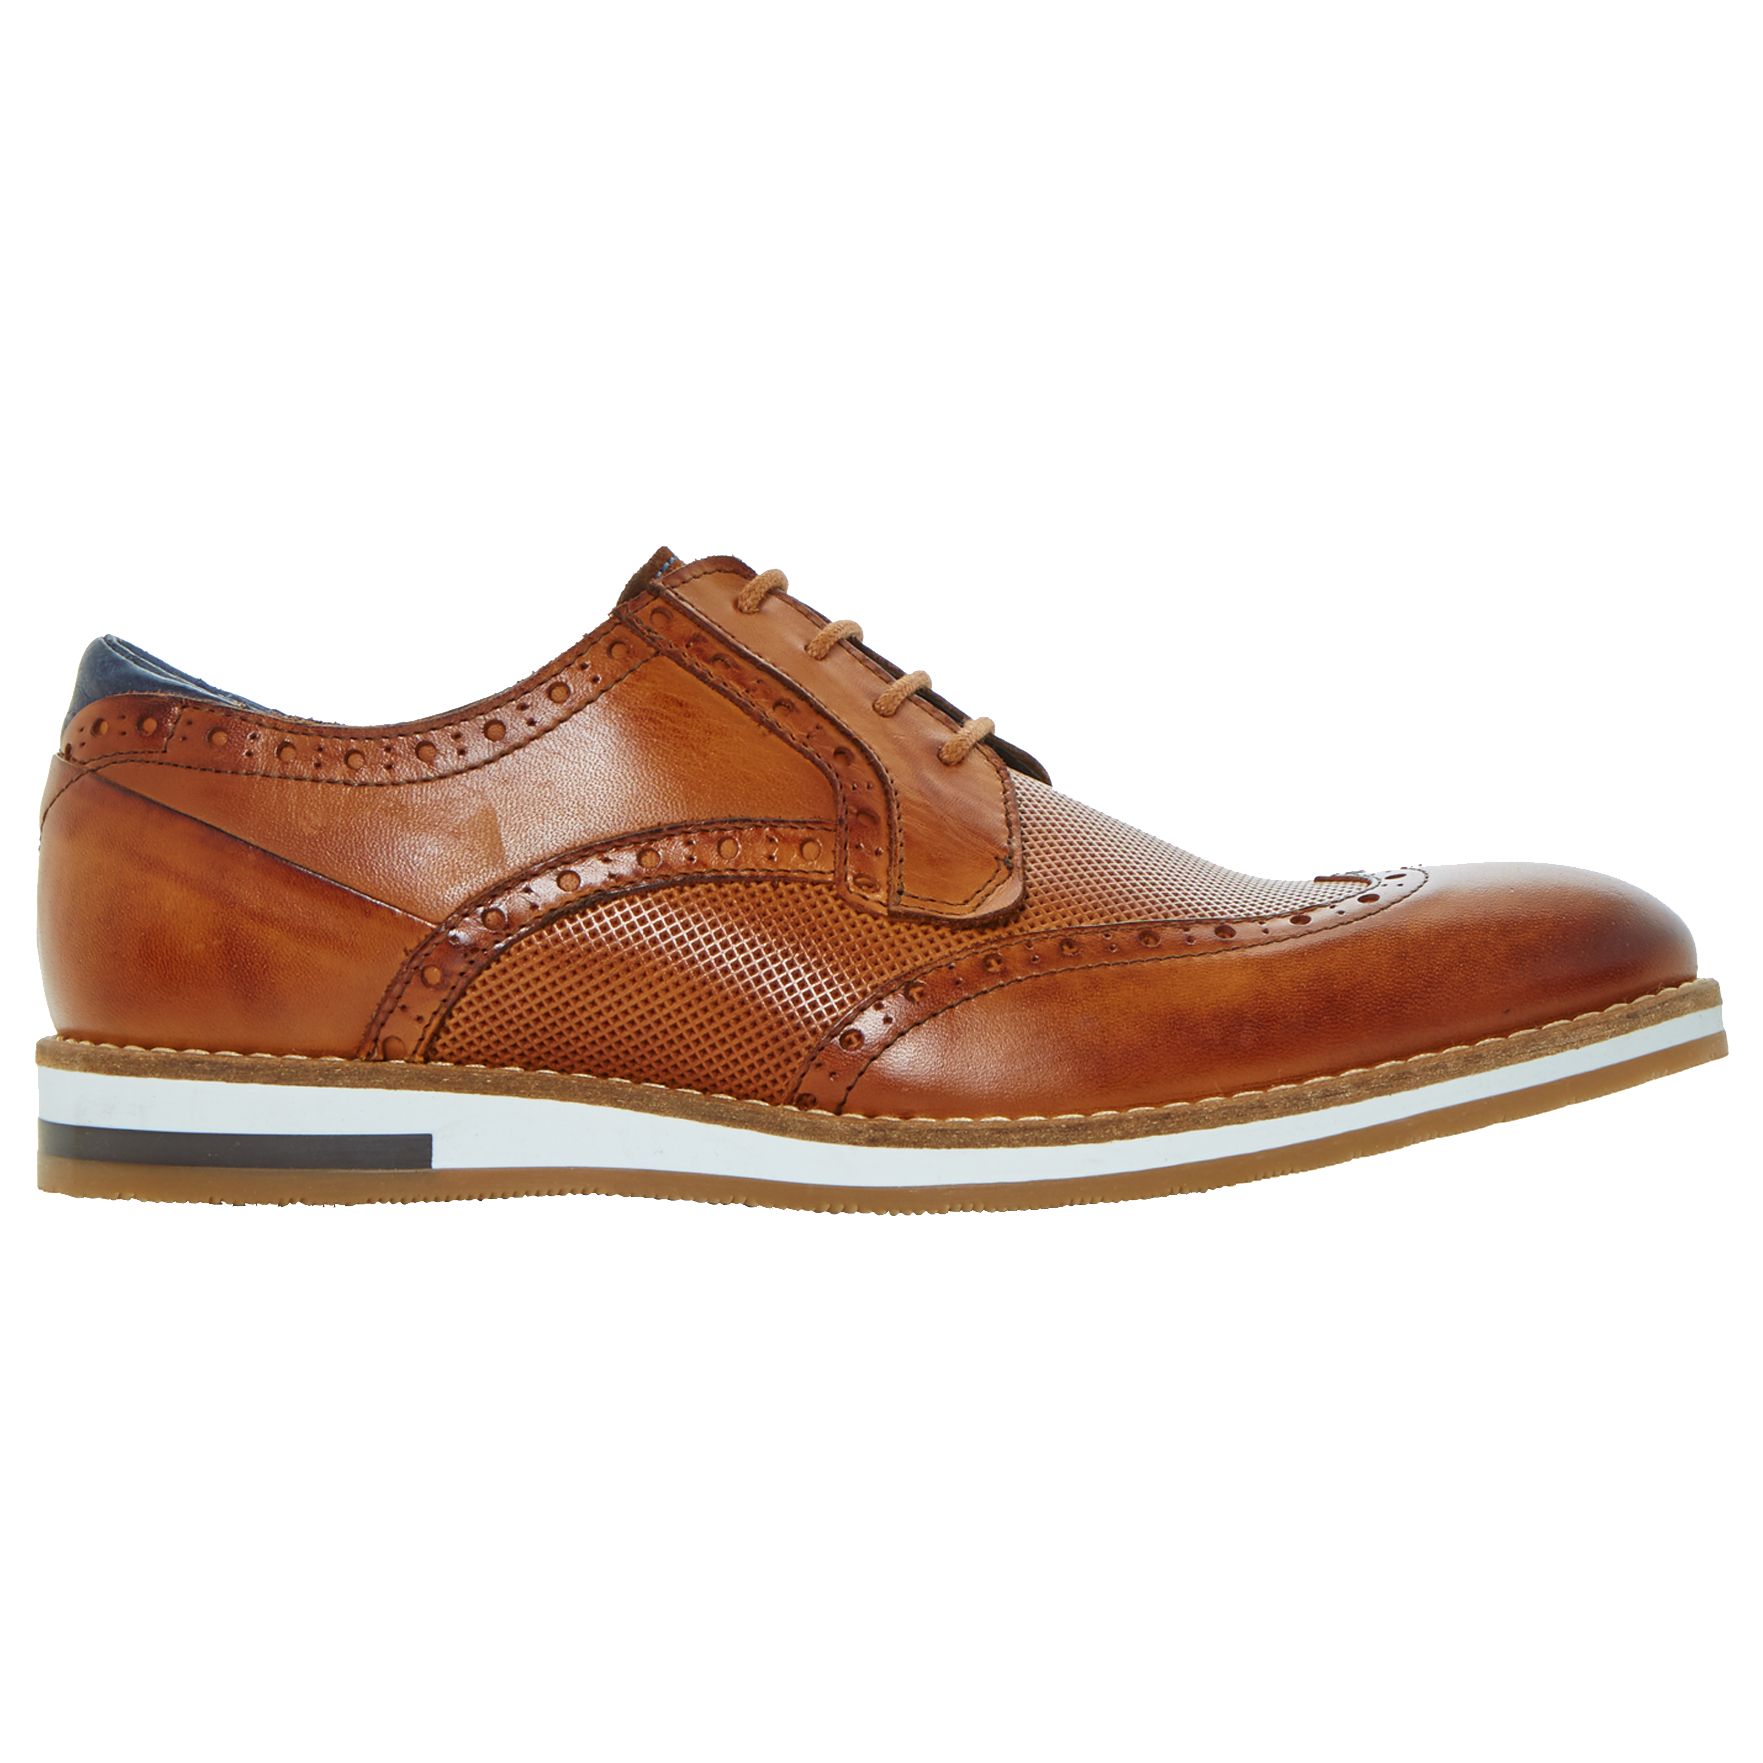 Bertie Baker Hill Gibson Leather Wingtip Shoes, Tan Leather, 6